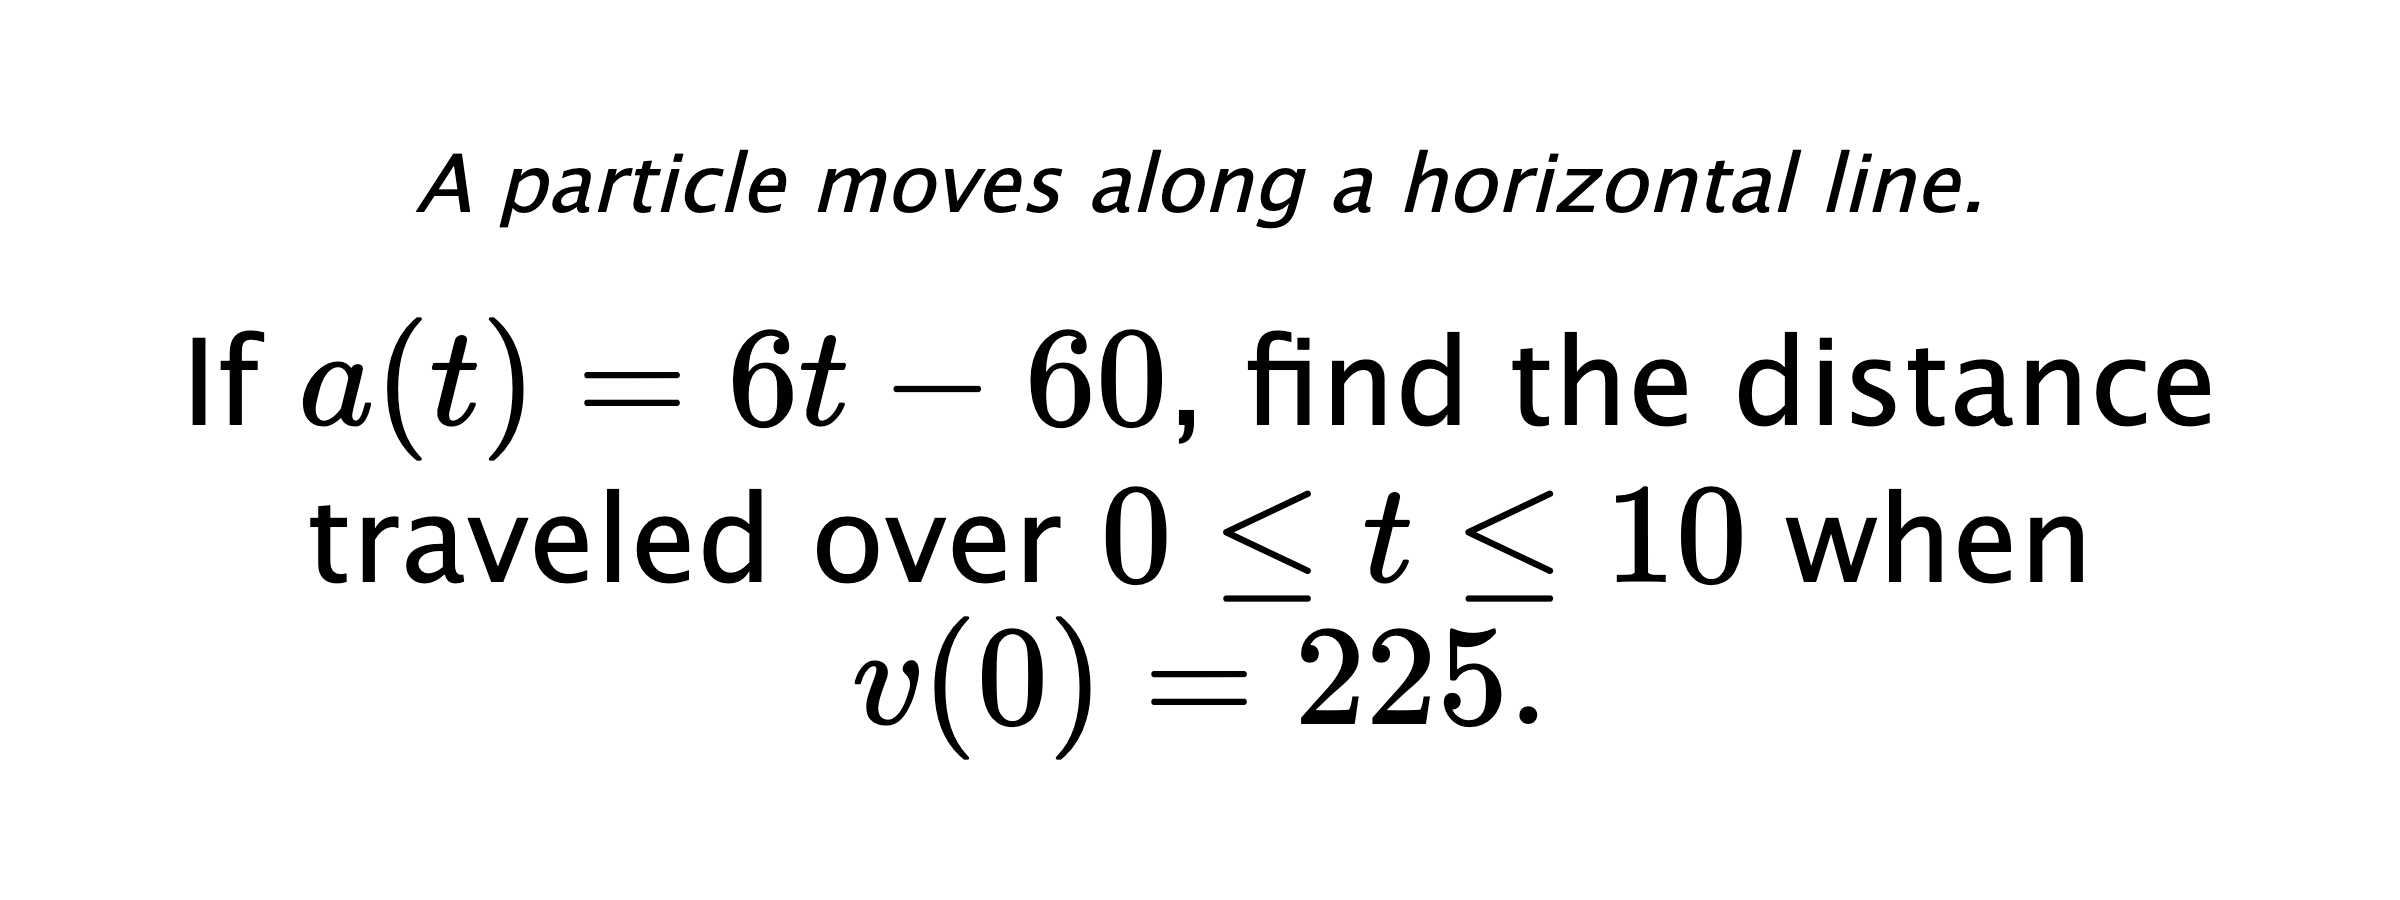 A particle moves along a horizontal line. If $ a(t)=6t-60 $, find the distance traveled over $ 0 \leq t \leq 10 $ when $ v(0)=225 .$